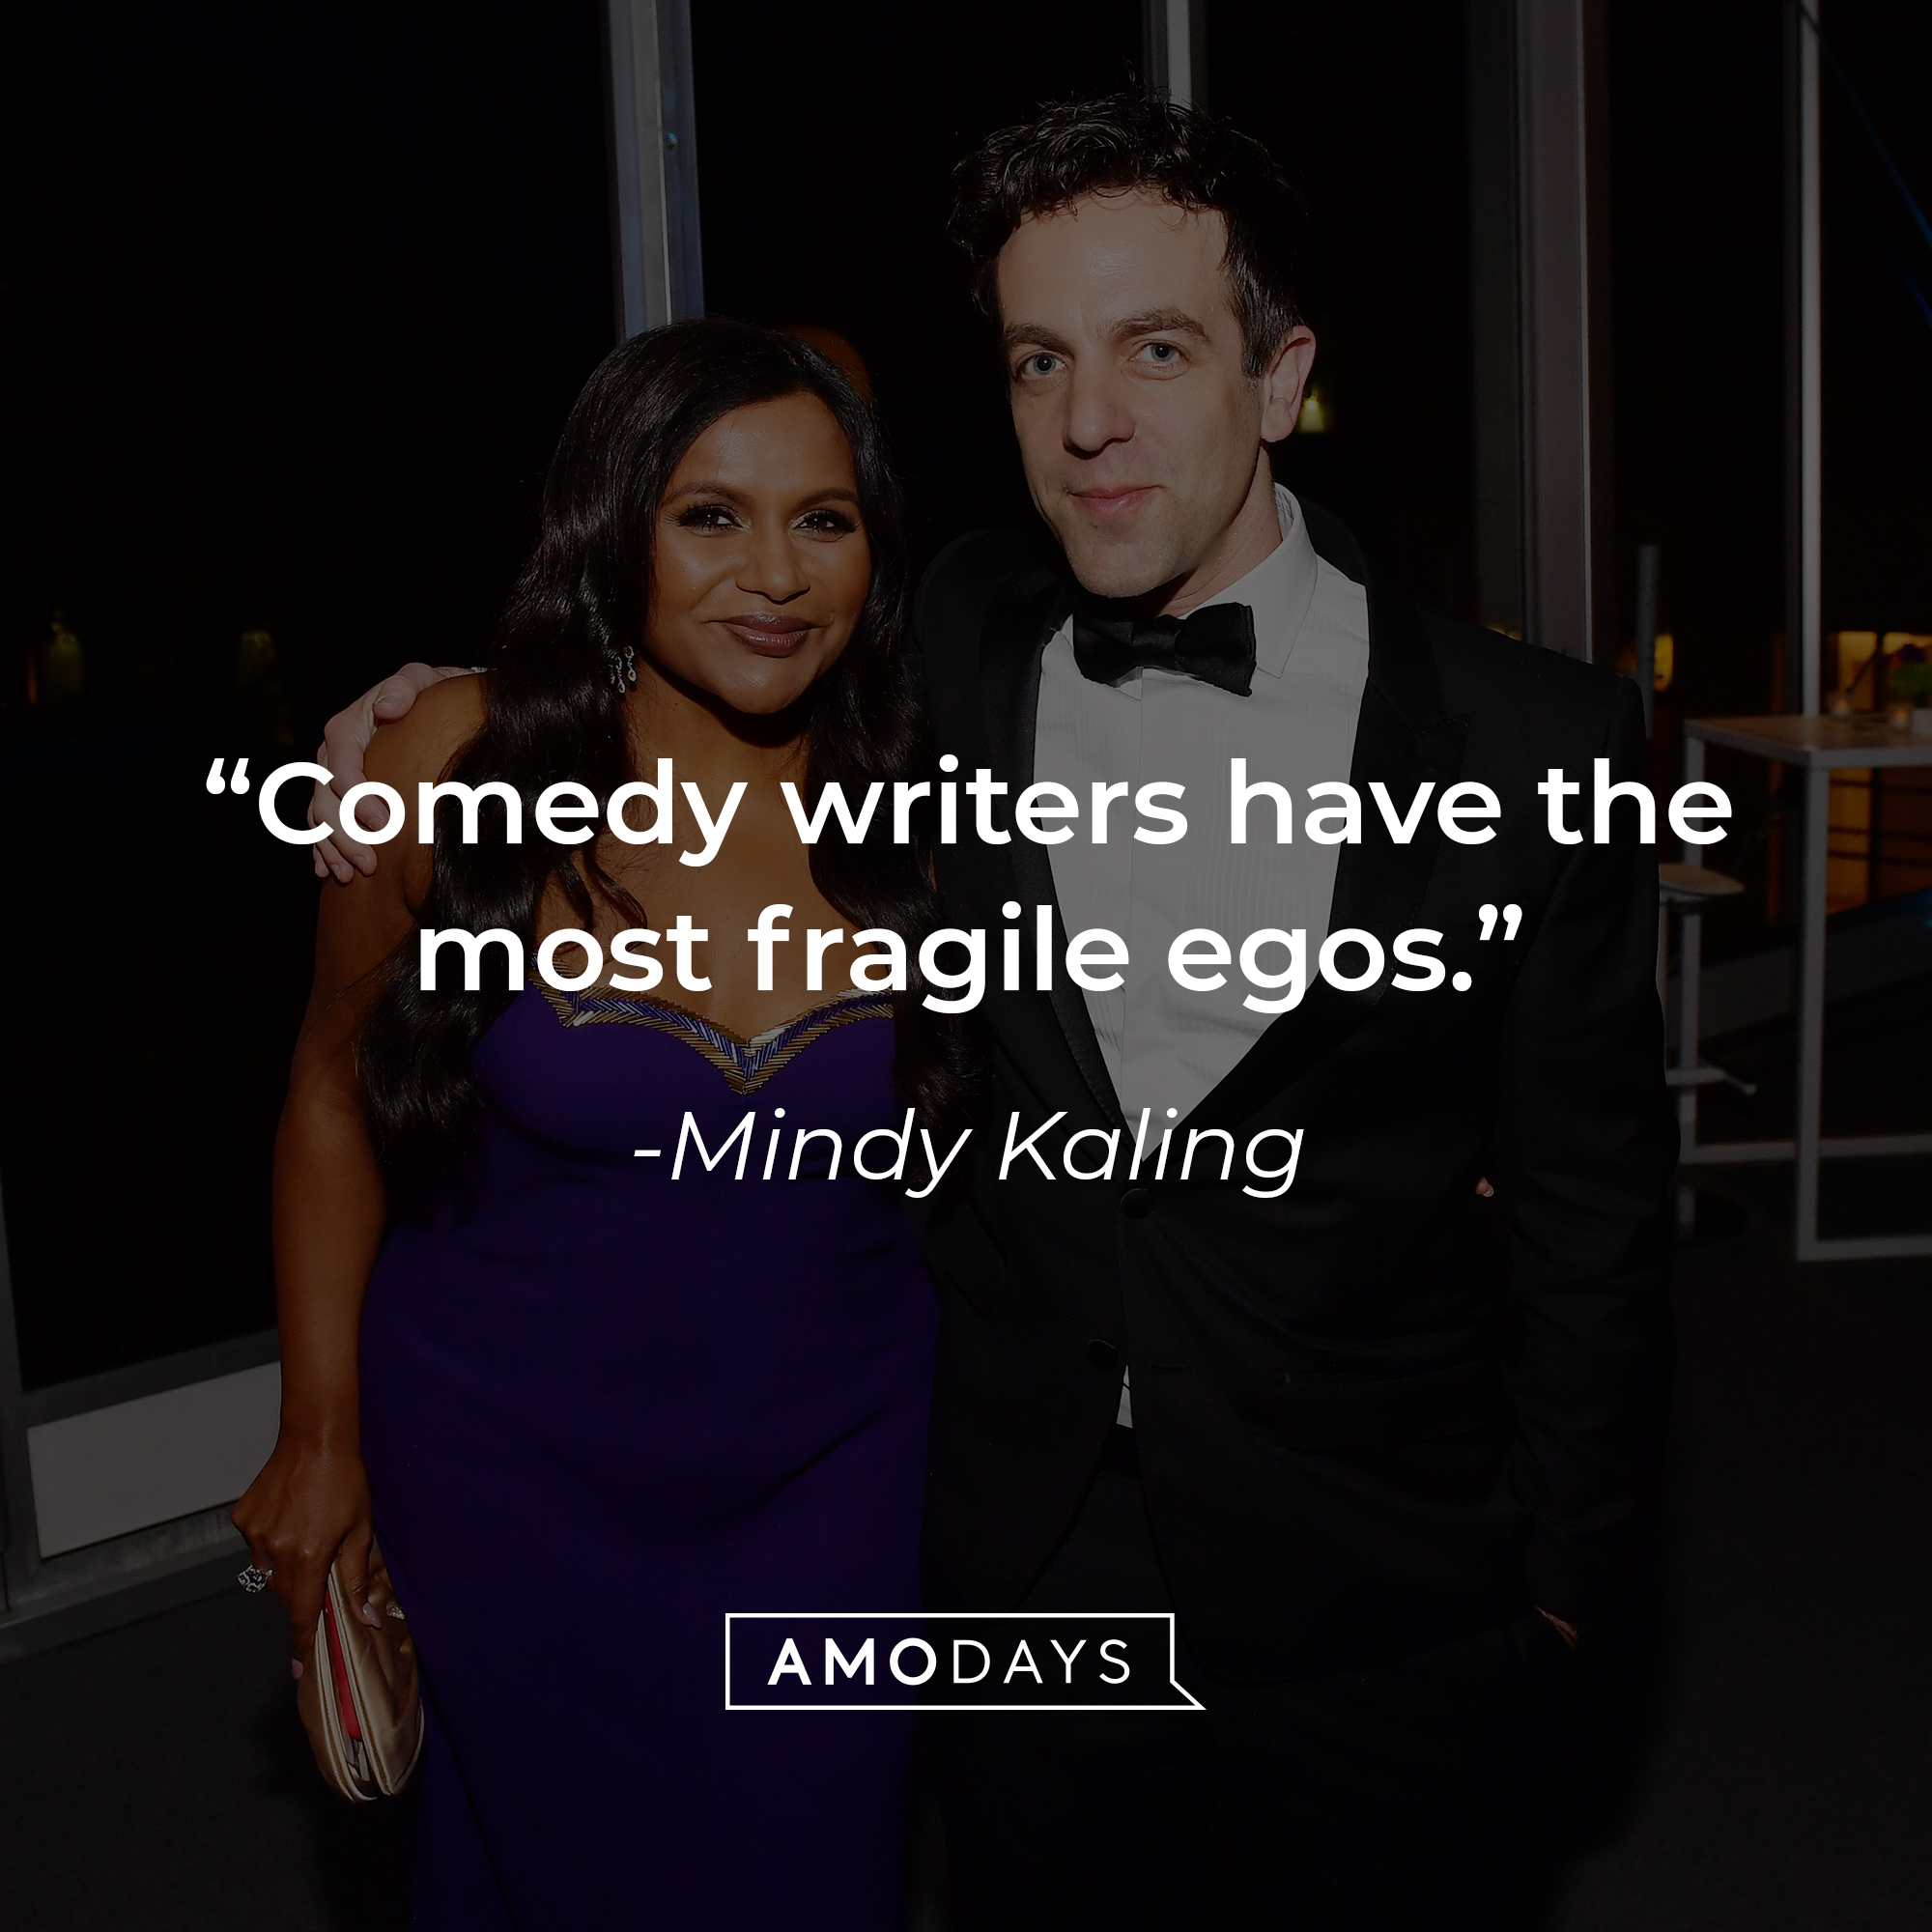 Mindy Kaling's quote: "Comedy writers have the most fragile egos." | Source: Getty Images